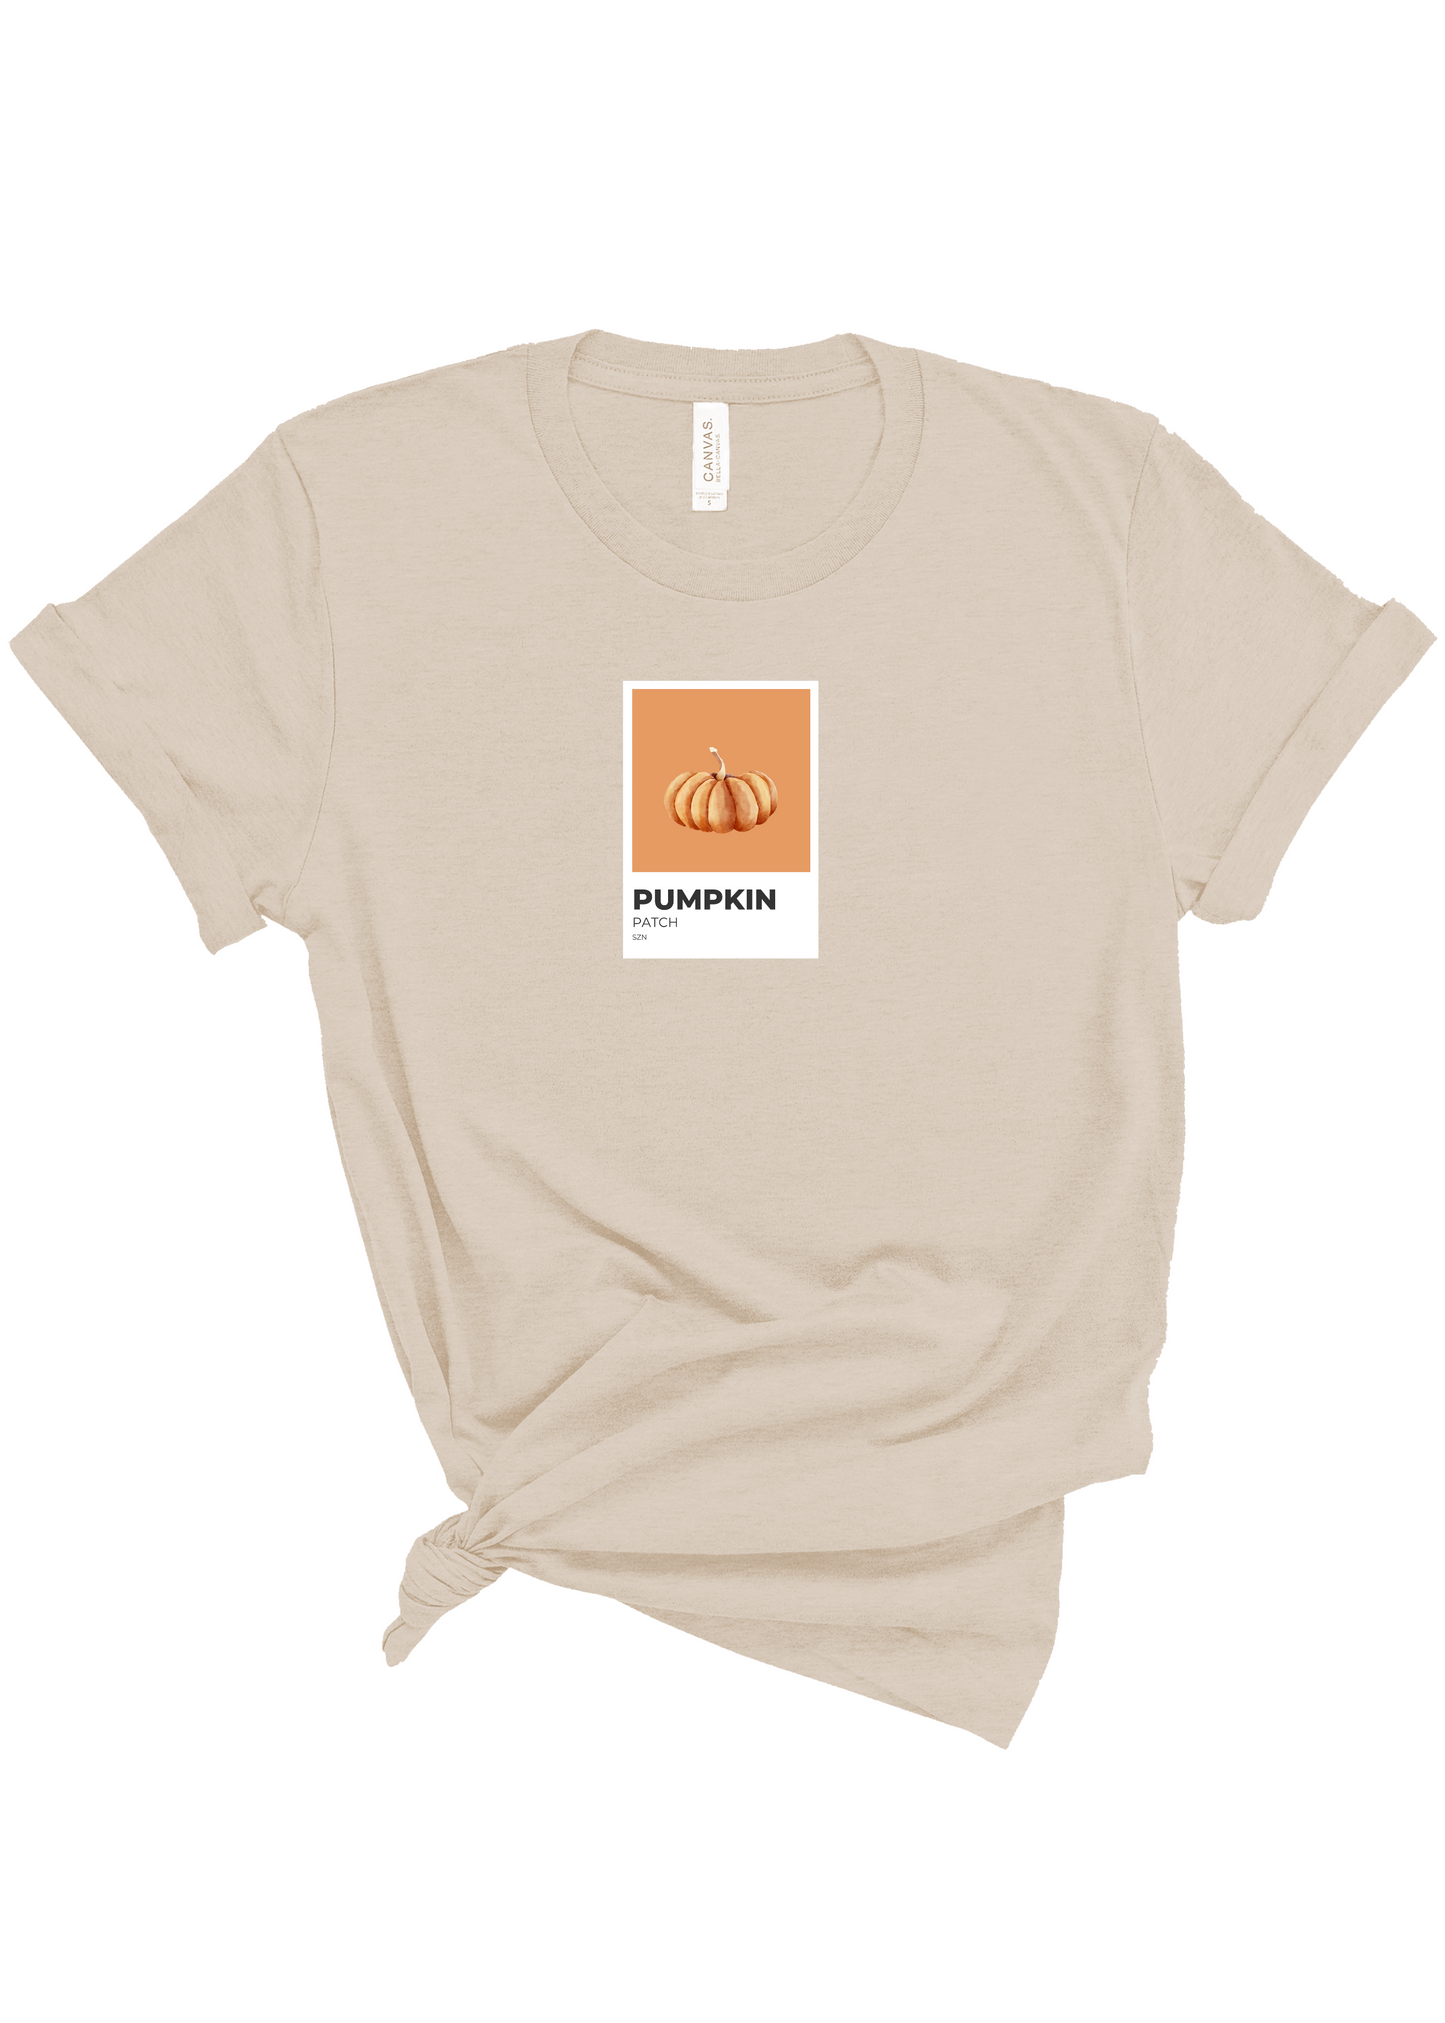 Pantone Pumpkin Patch Szn | Adult Tee | RTS-Sister Shirts-Sister Shirts, Cute & Custom Tees for Mama & Littles in Trussville, Alabama.